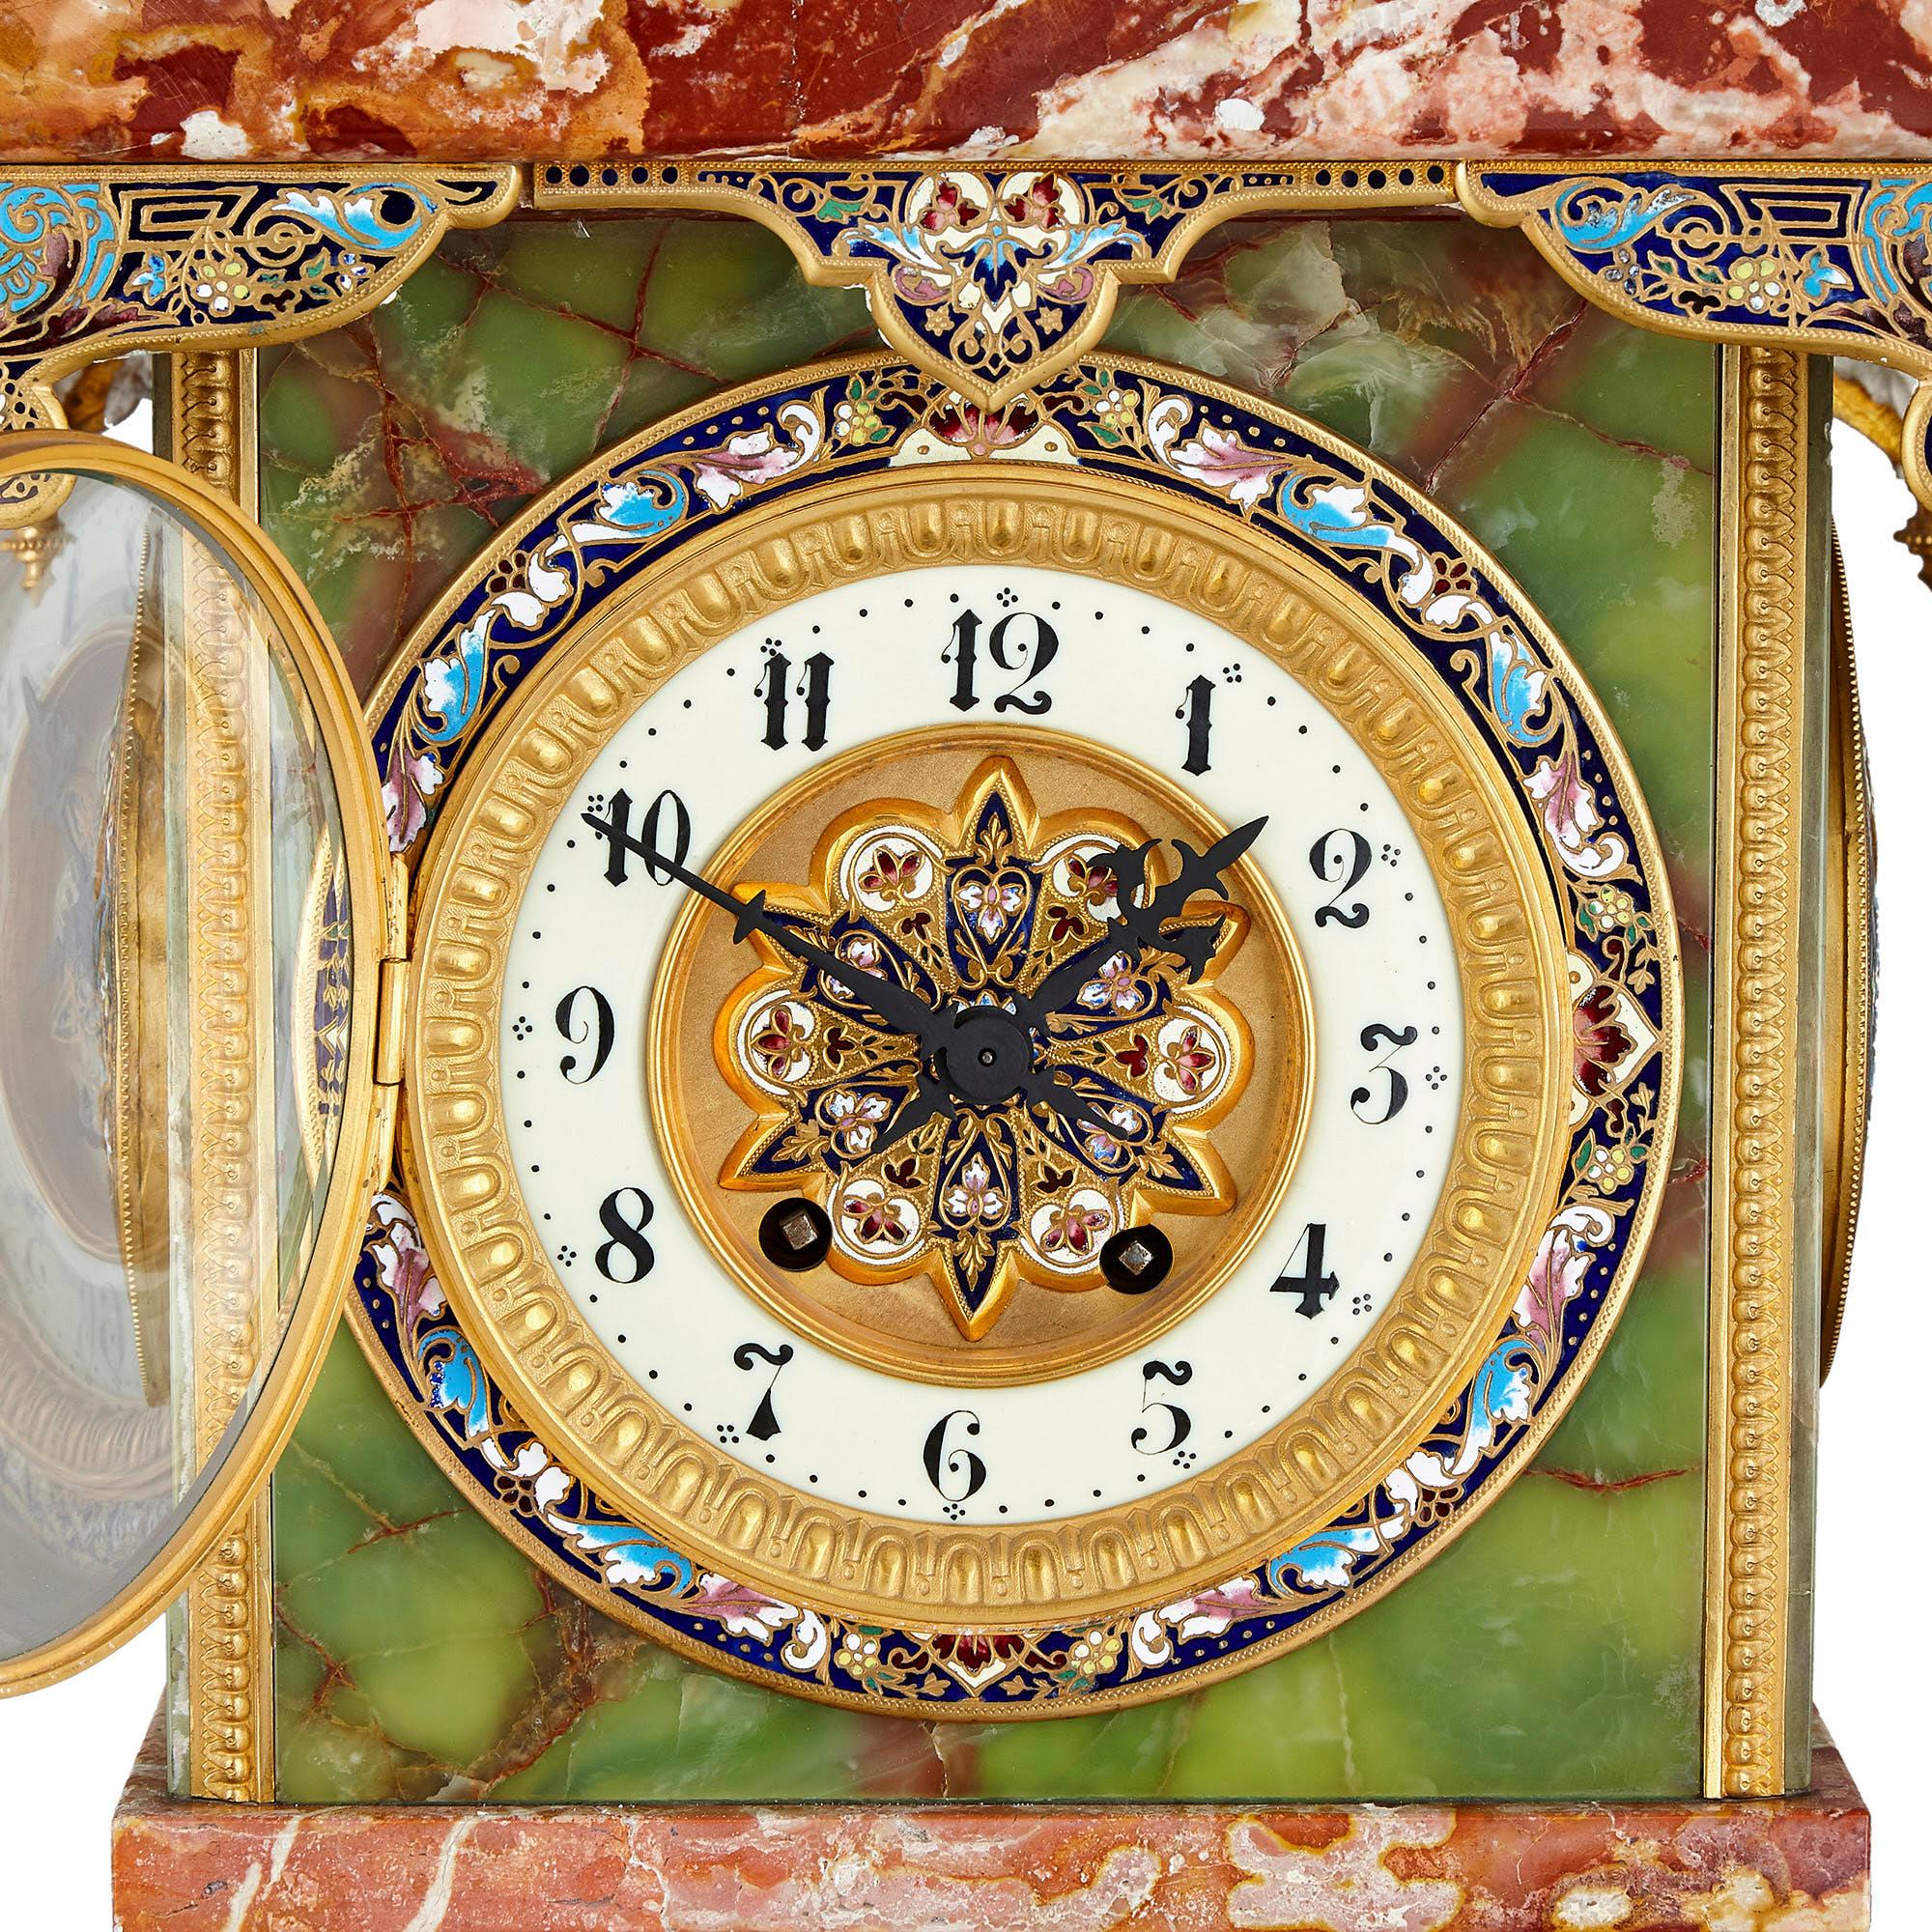 French Renaissance style gilt bronze and enamel mounted onyx longcase clock
French, late 19th century
Measures: Height 126cm, width 37cm, depth 30cm

This colourful longcase clock was created in France in the late 19th Century. It has been